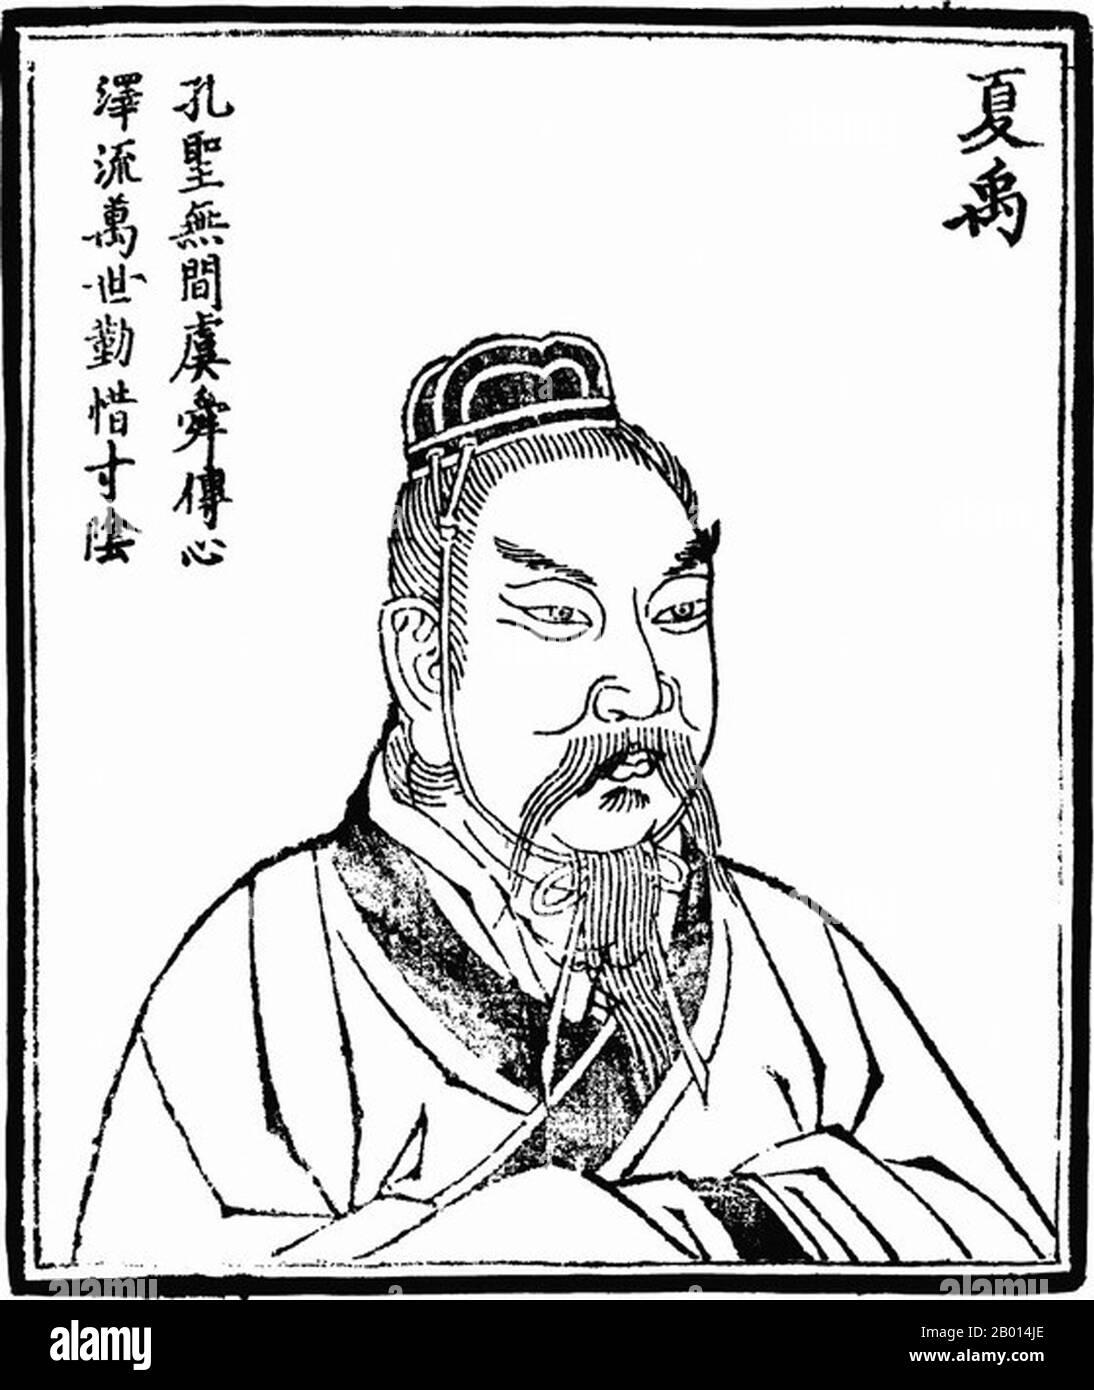 China: Yu the Great (c. 2123-2025 BCE), legendary founder of the Xia Dynasty (2205-1766 BCE). Illustration, c. 1498.  Da Yu, commonly known as Yu the Great, was a mythical king of ancient China, best remembered for teaching the people techniques to tame rivers and lakes during The Great Flood. He founded the Xia Dynasty, which was the first dynasty in traditional Chinese historiography. His supposed reign well predates the oldest-known written records in China, and therefore there is controversy and debate about whether he truly existed. Stock Photo